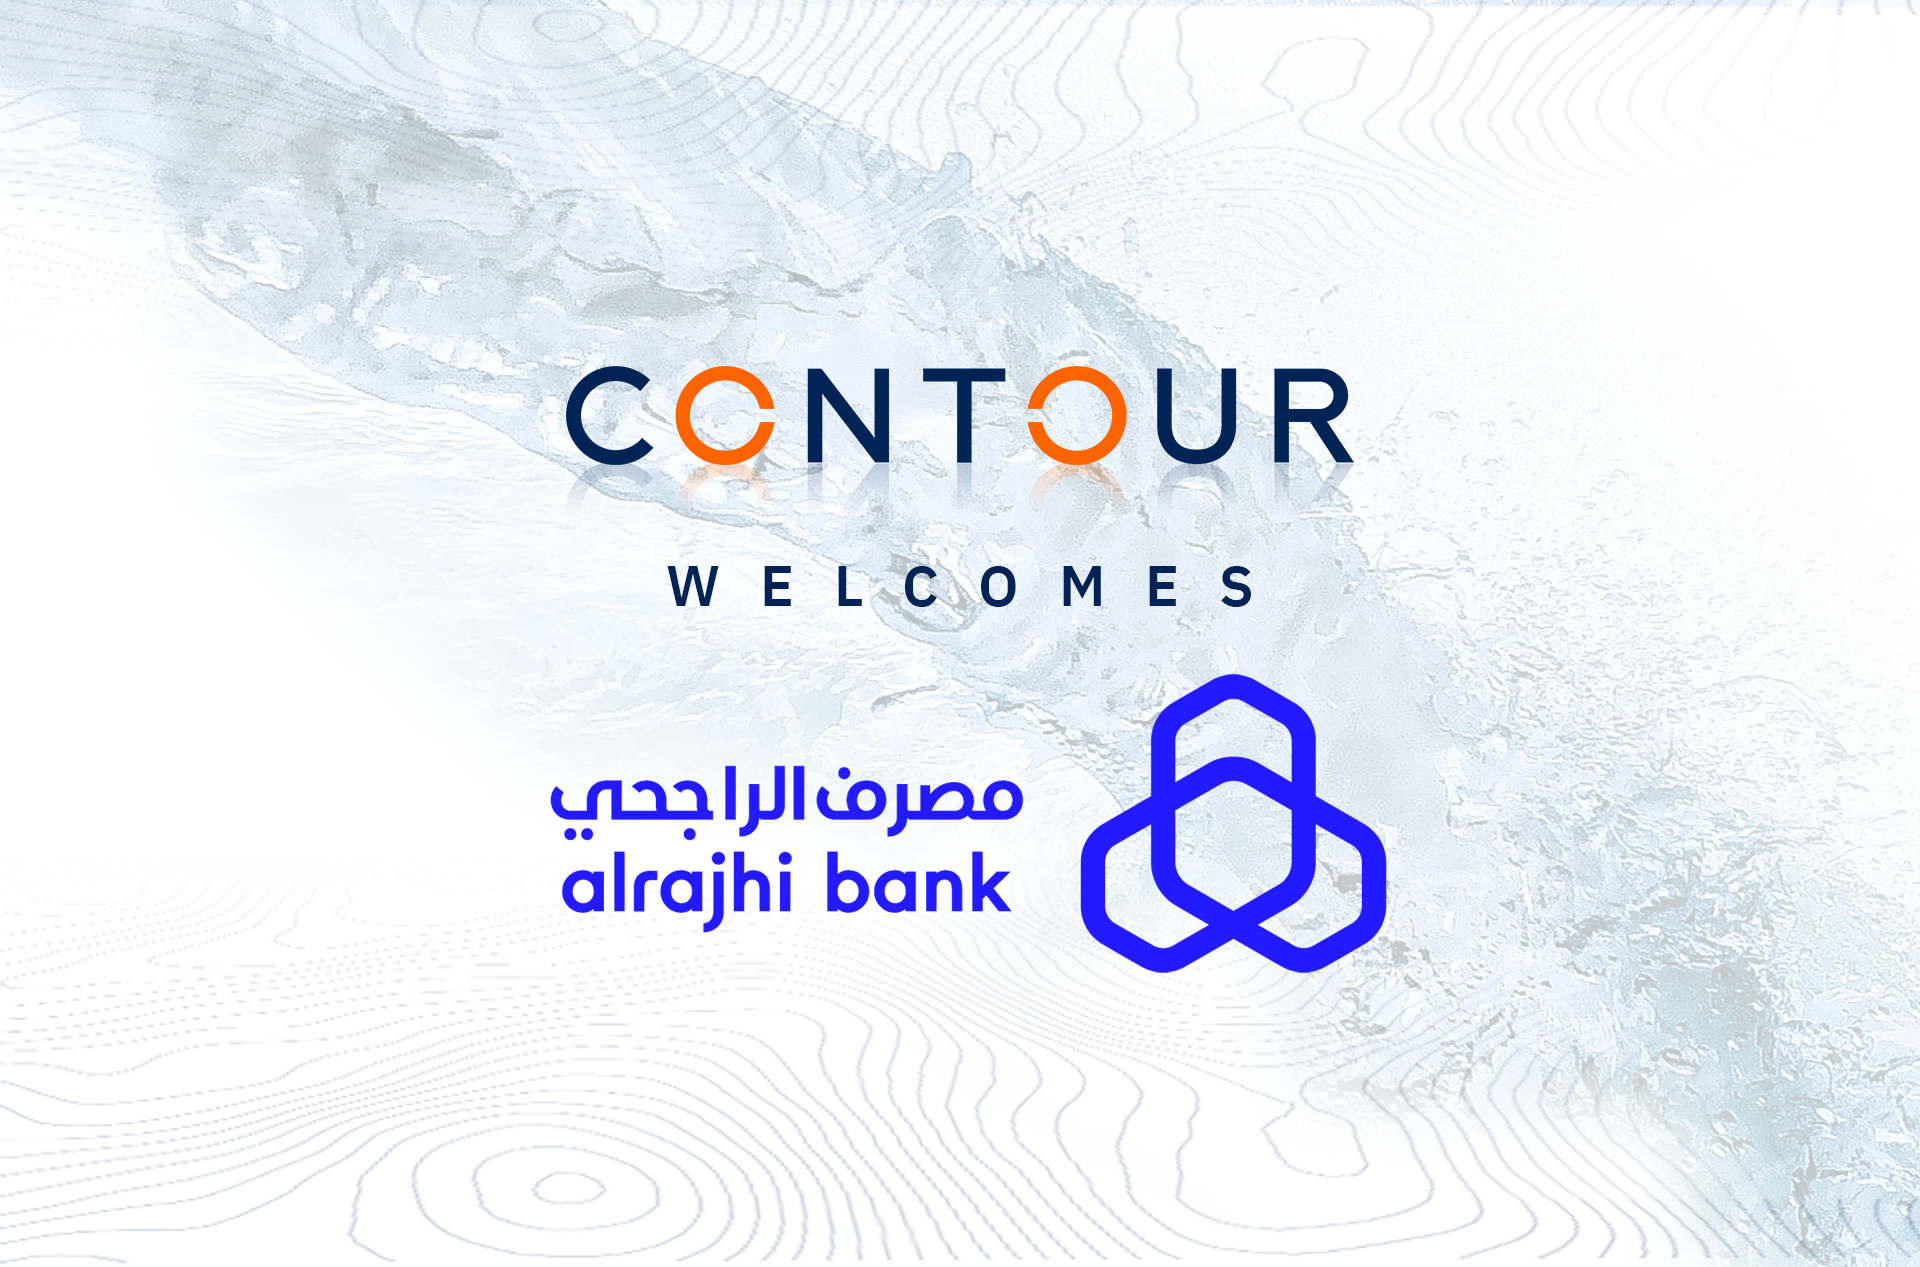 Contour grows its global footprint with the addition of Saudi Arabia’s Al Rajhi Bank to its network